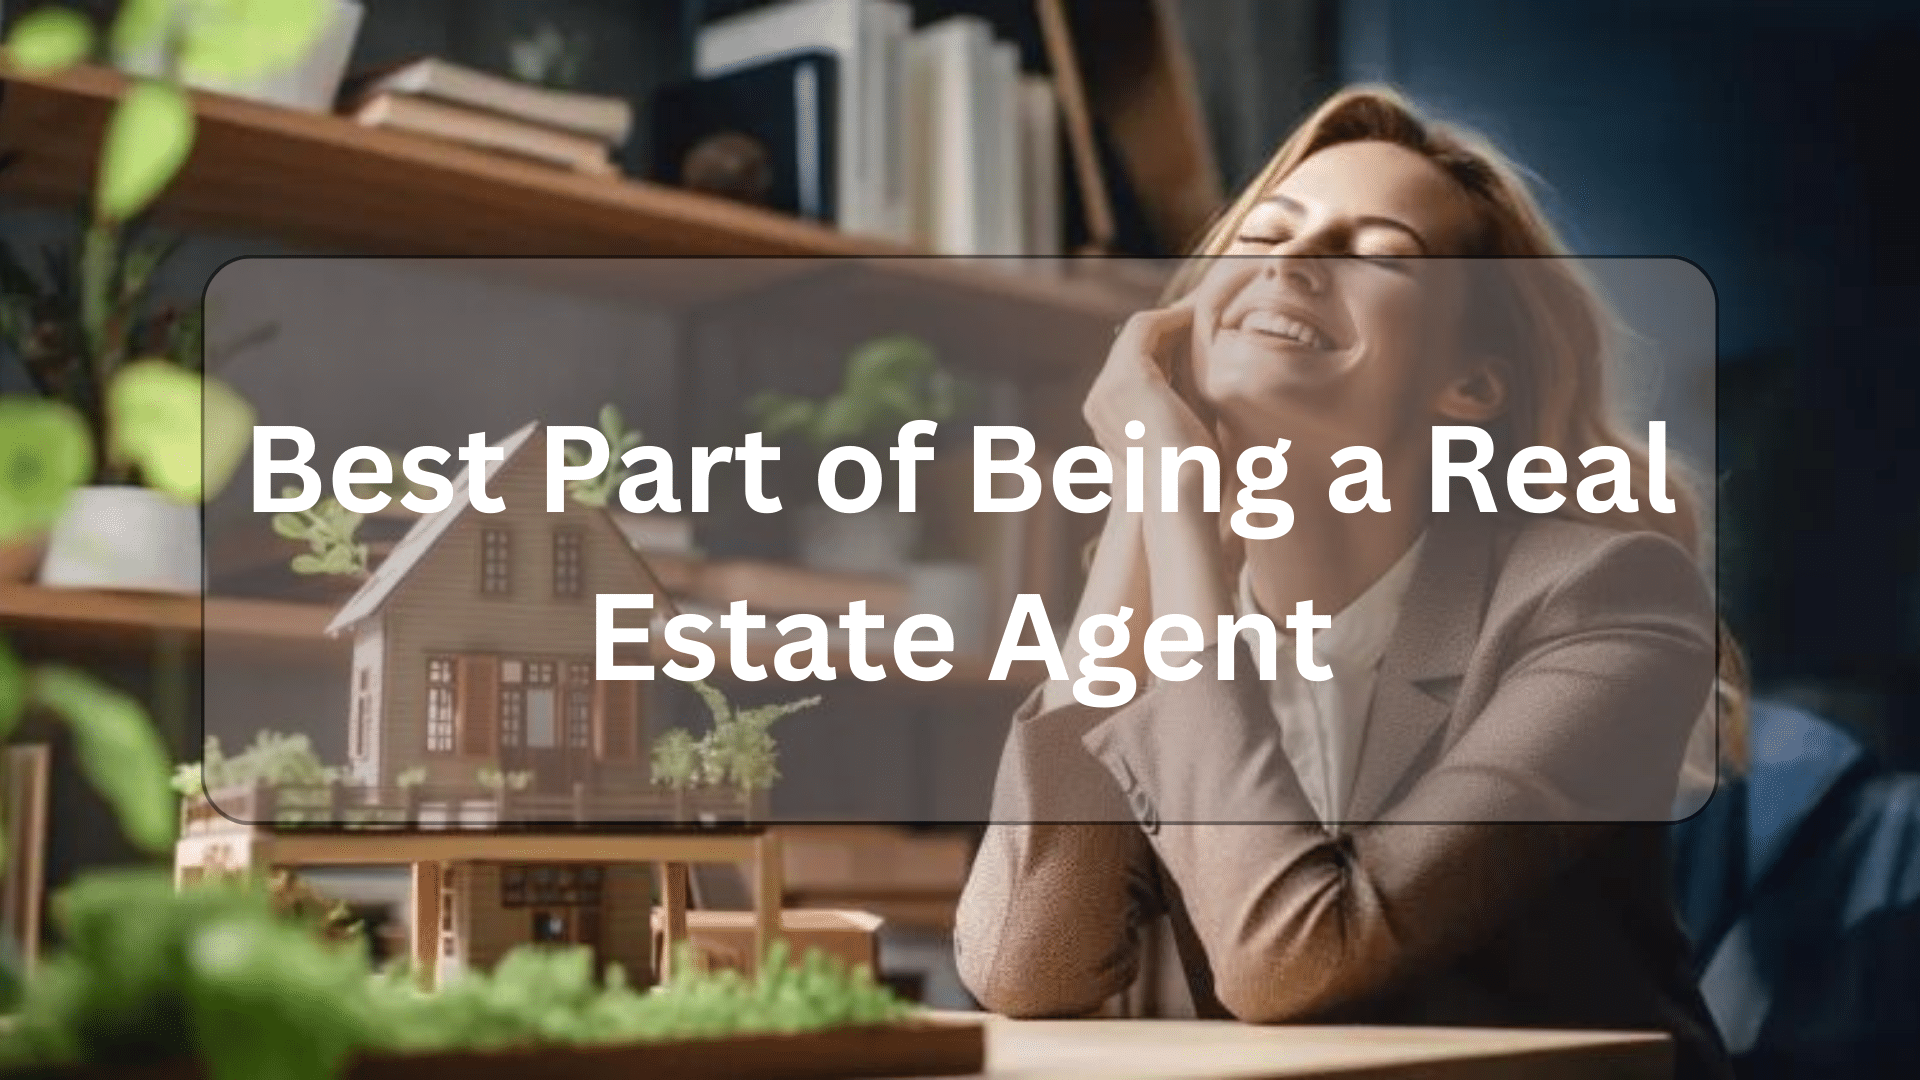 Best Part of Being a Real Estate Agent